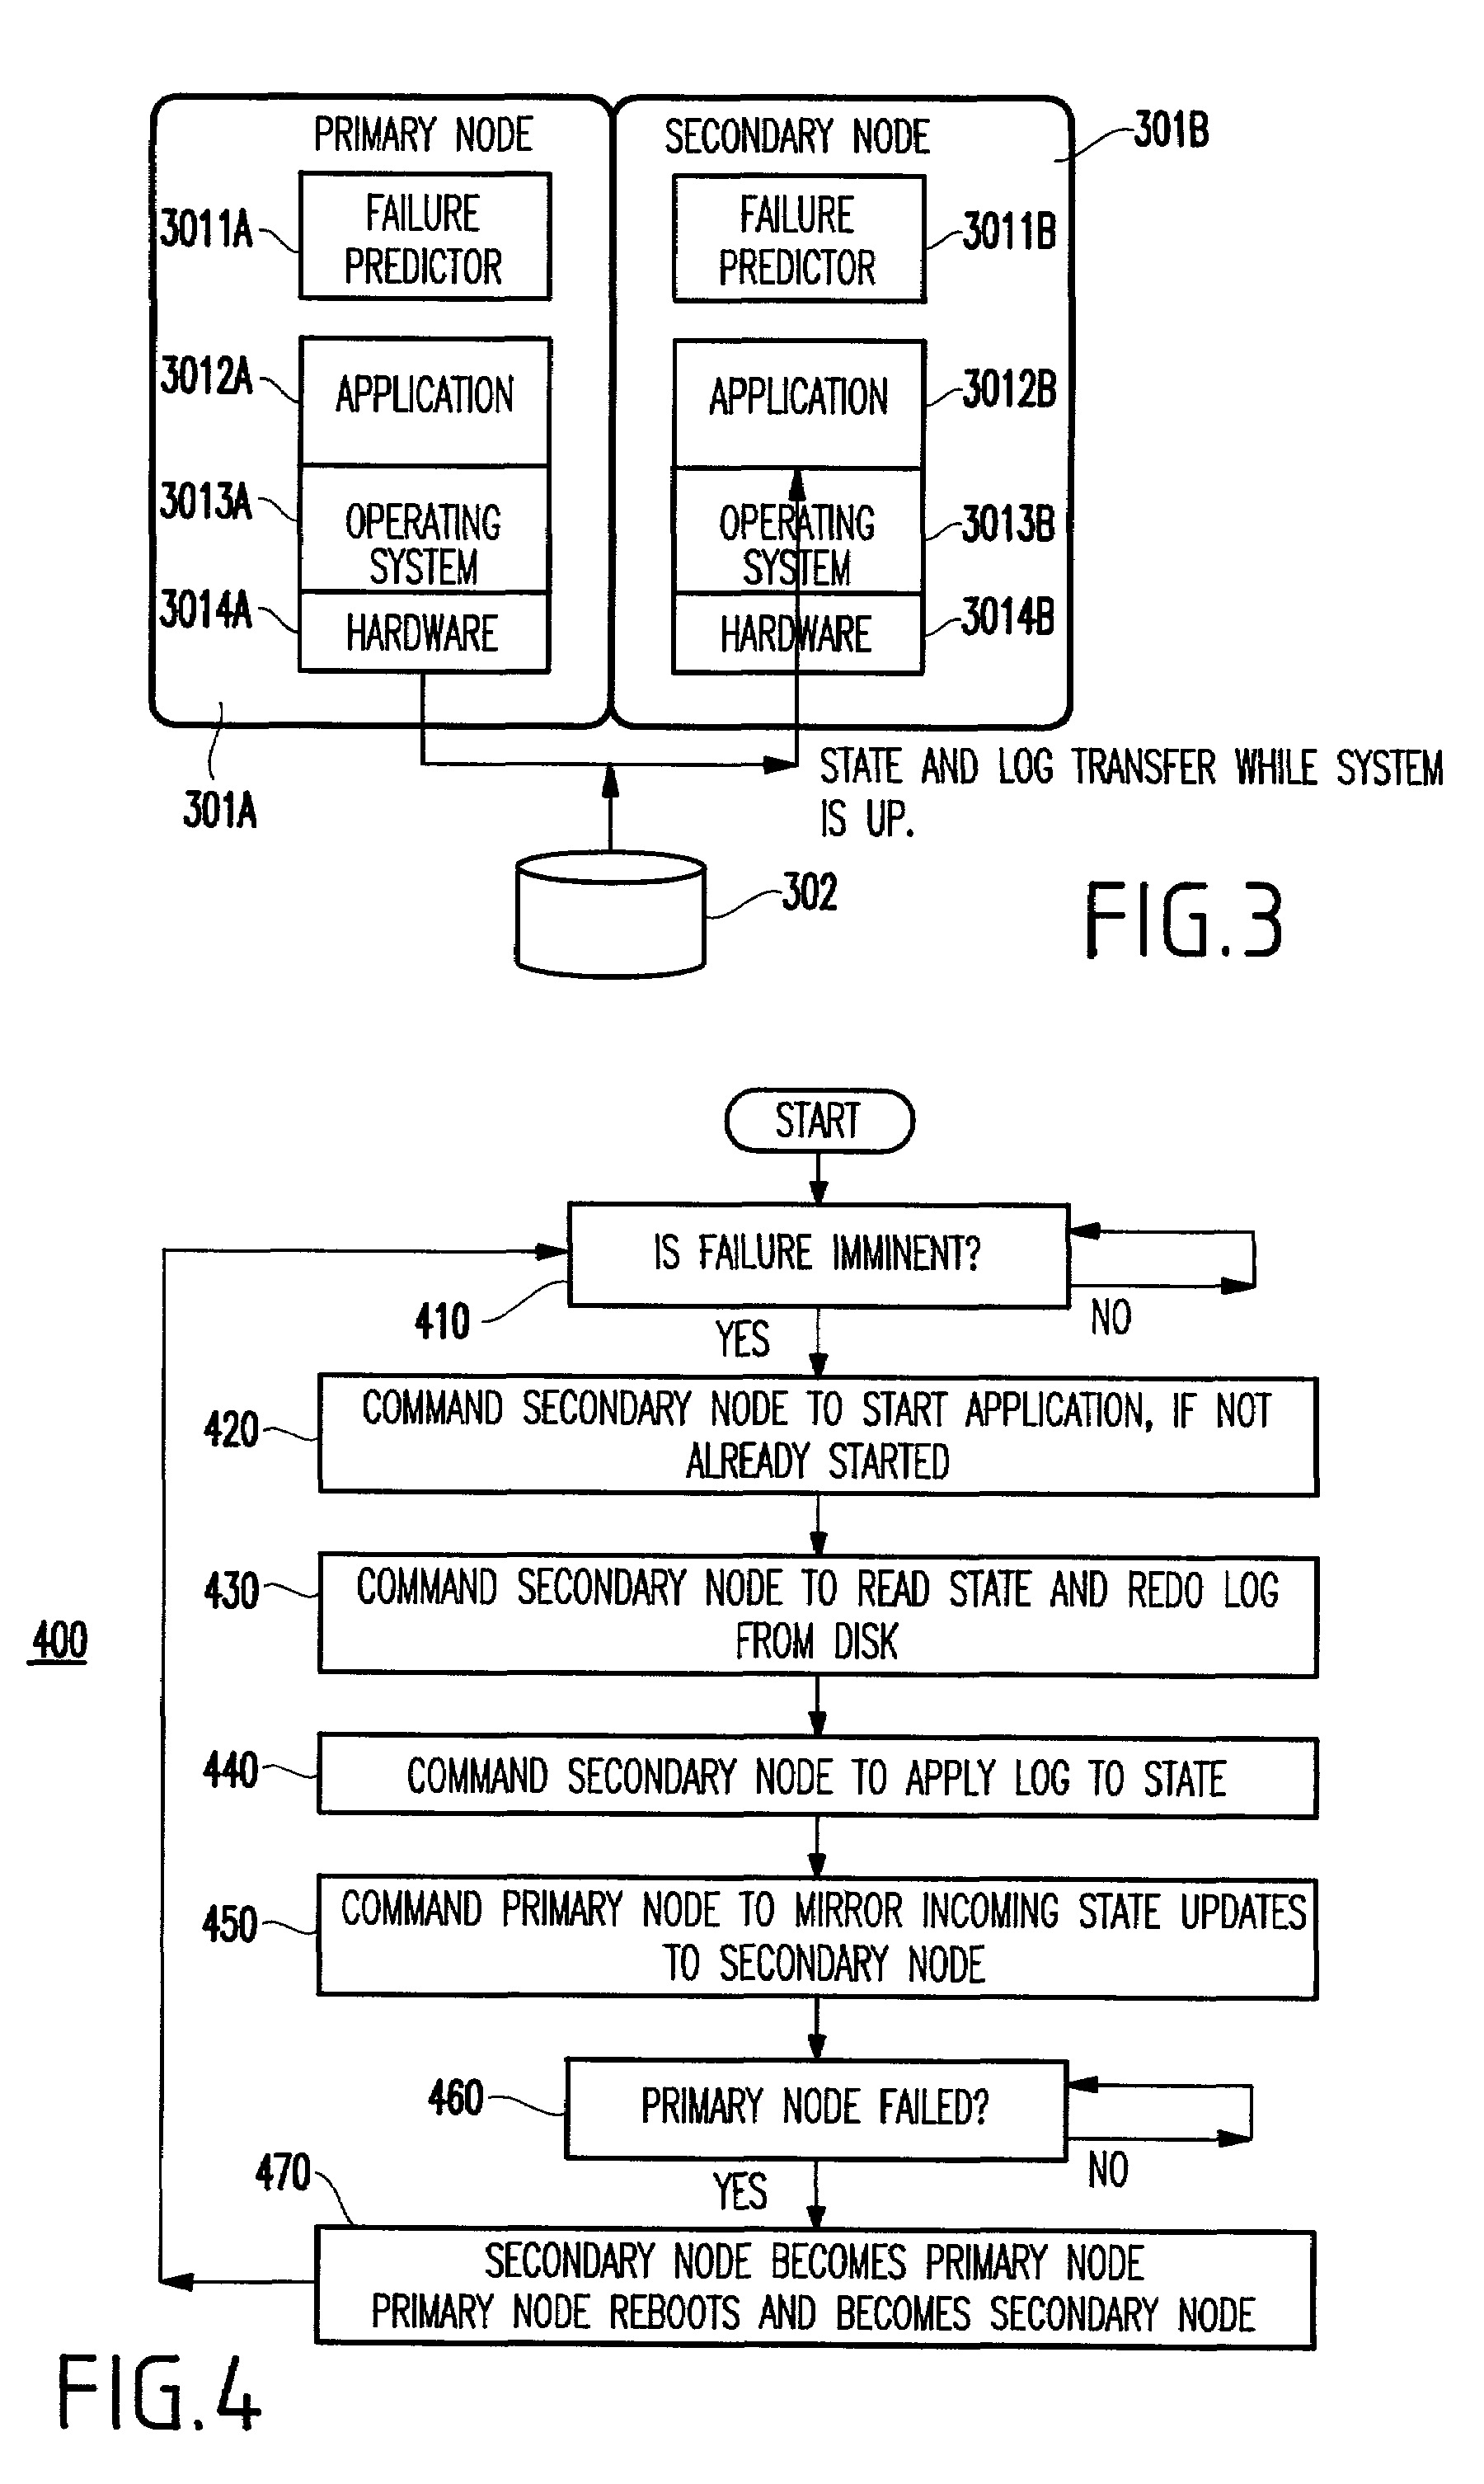 Method and system for proactively reducing the outage time of a computer system